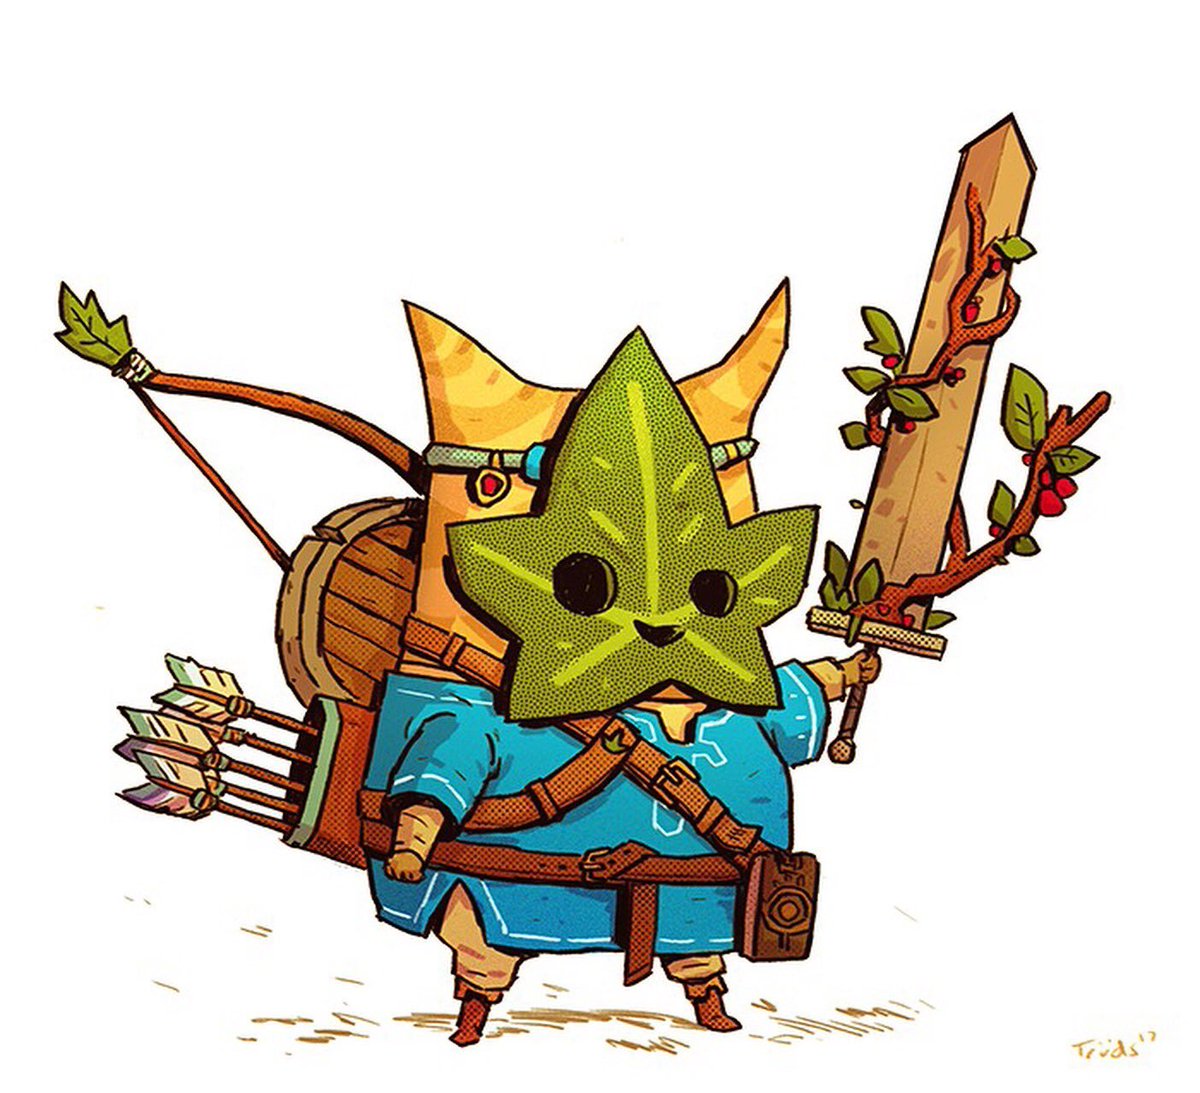 I drew this back in 2017, and am verrrrrrrrrrrrrrrrrrrry excited for the new Zelda! Fingers crossed there are koroks in it!!